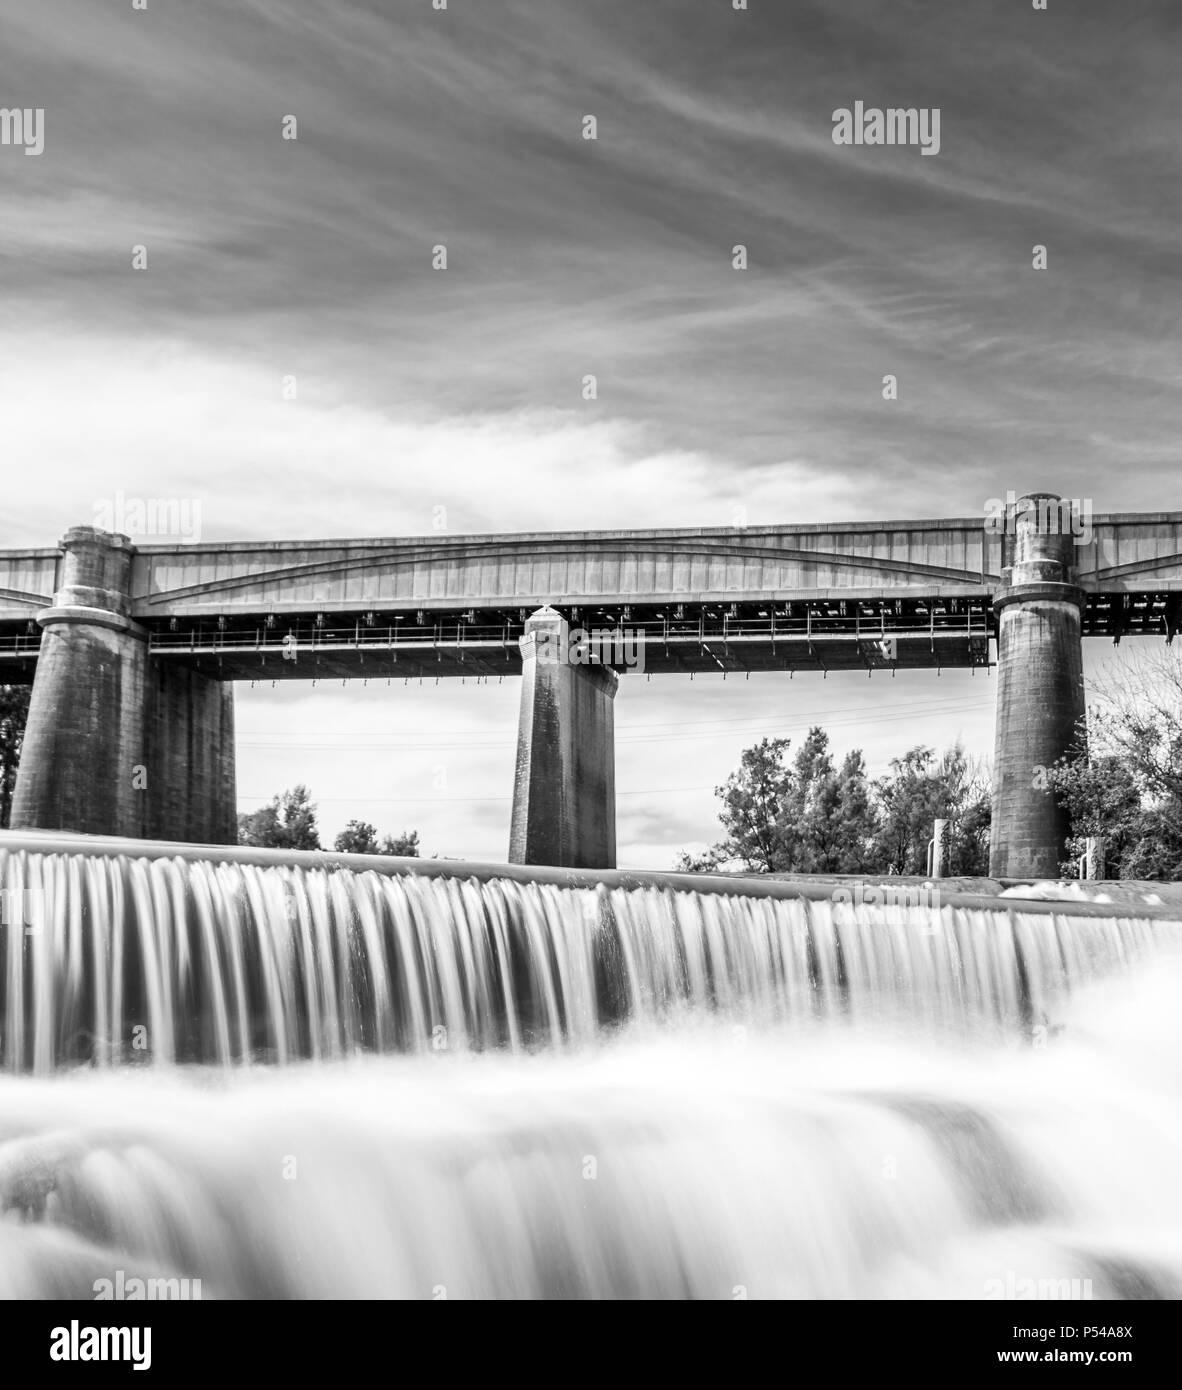 Black and White Neutral Density shot of a Waterfall with a train bridge in the background Stock Photo